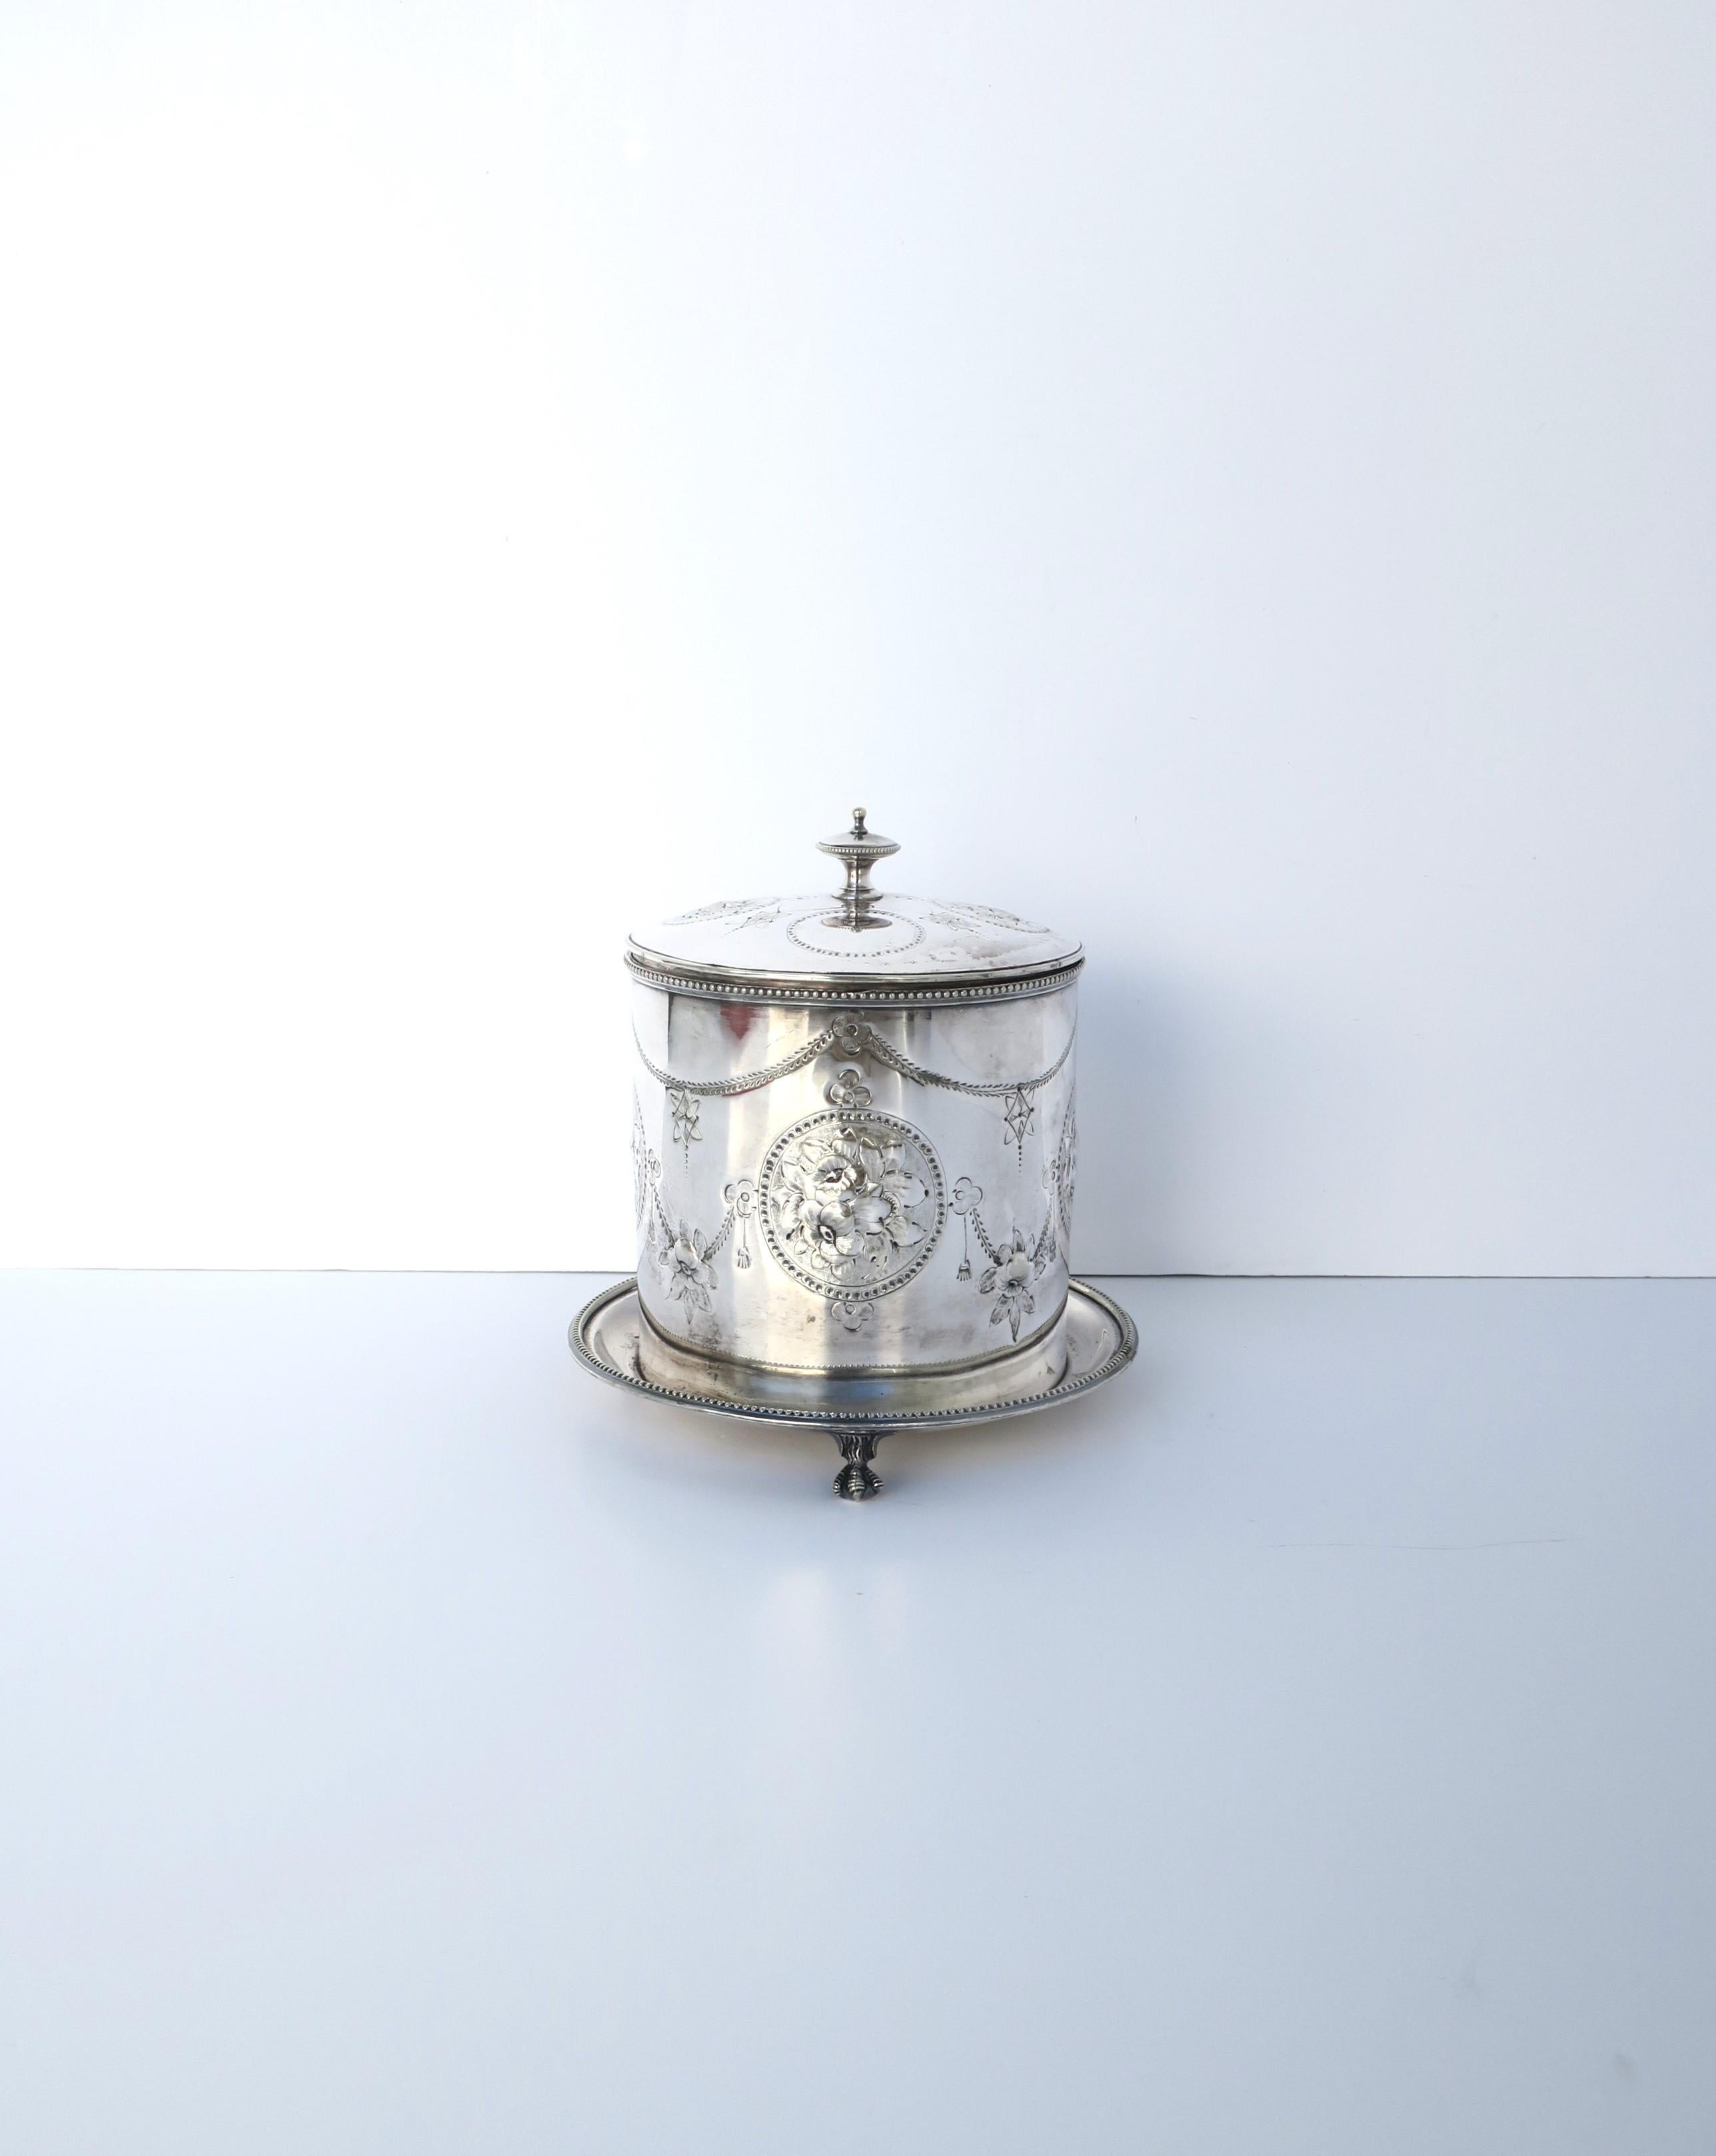 An English sterling silver plate covered biscuit box or tea caddy with hinged finial lid top, attached claw footed gallery tray, and exterior repousse design around, circa 20th century, England. A great piece to hold tea, biscuits, cookies, treats,